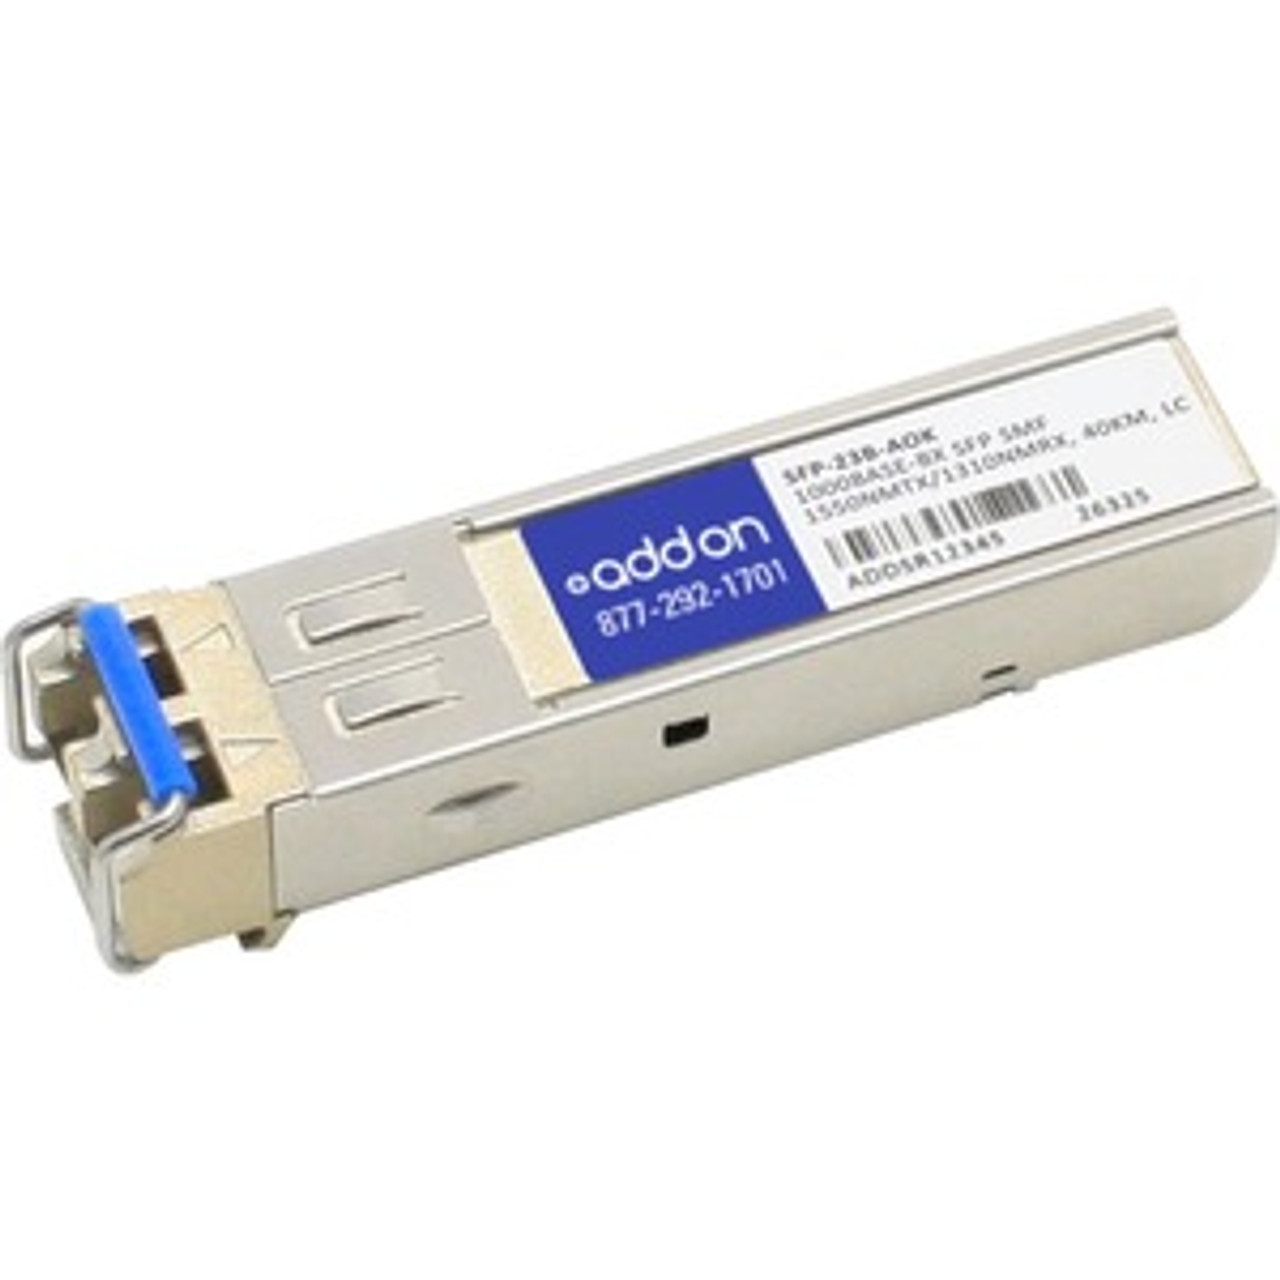 SFP-23B-AOK AddOn 1Gbps 1000Base-BX Single-mode Fiber 40km 1550nmTX/1310nmRX LC Connector SFP Transceiver Module for Rad Compatible